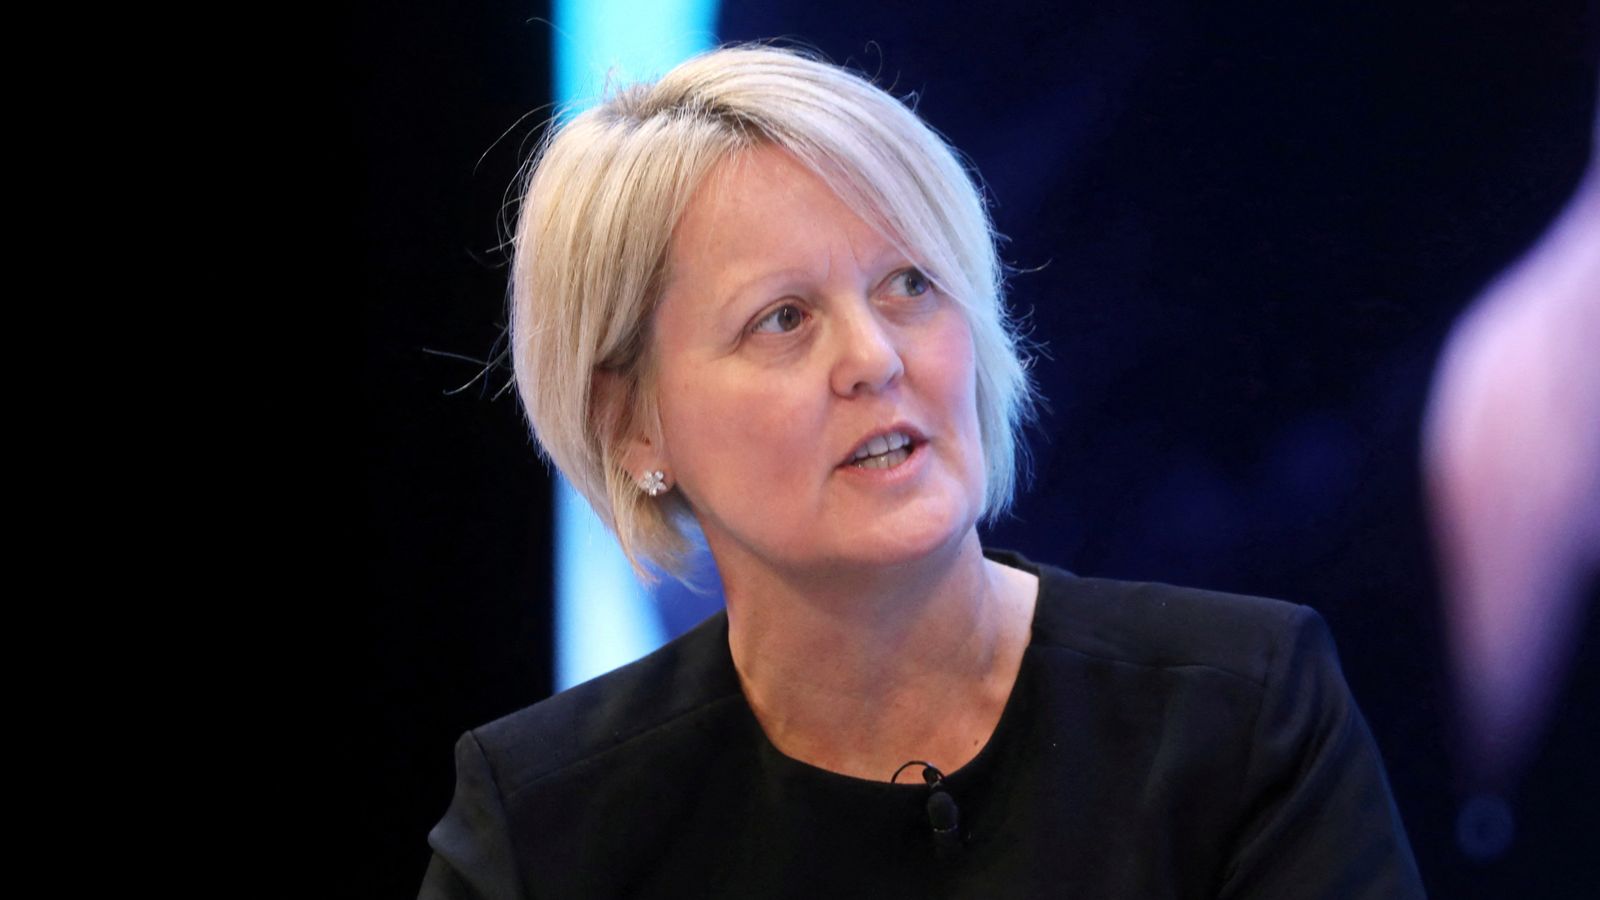 Ex-NatWest boss Dame Alison Rose who resigned over Nigel Farage row could bank £2.4m